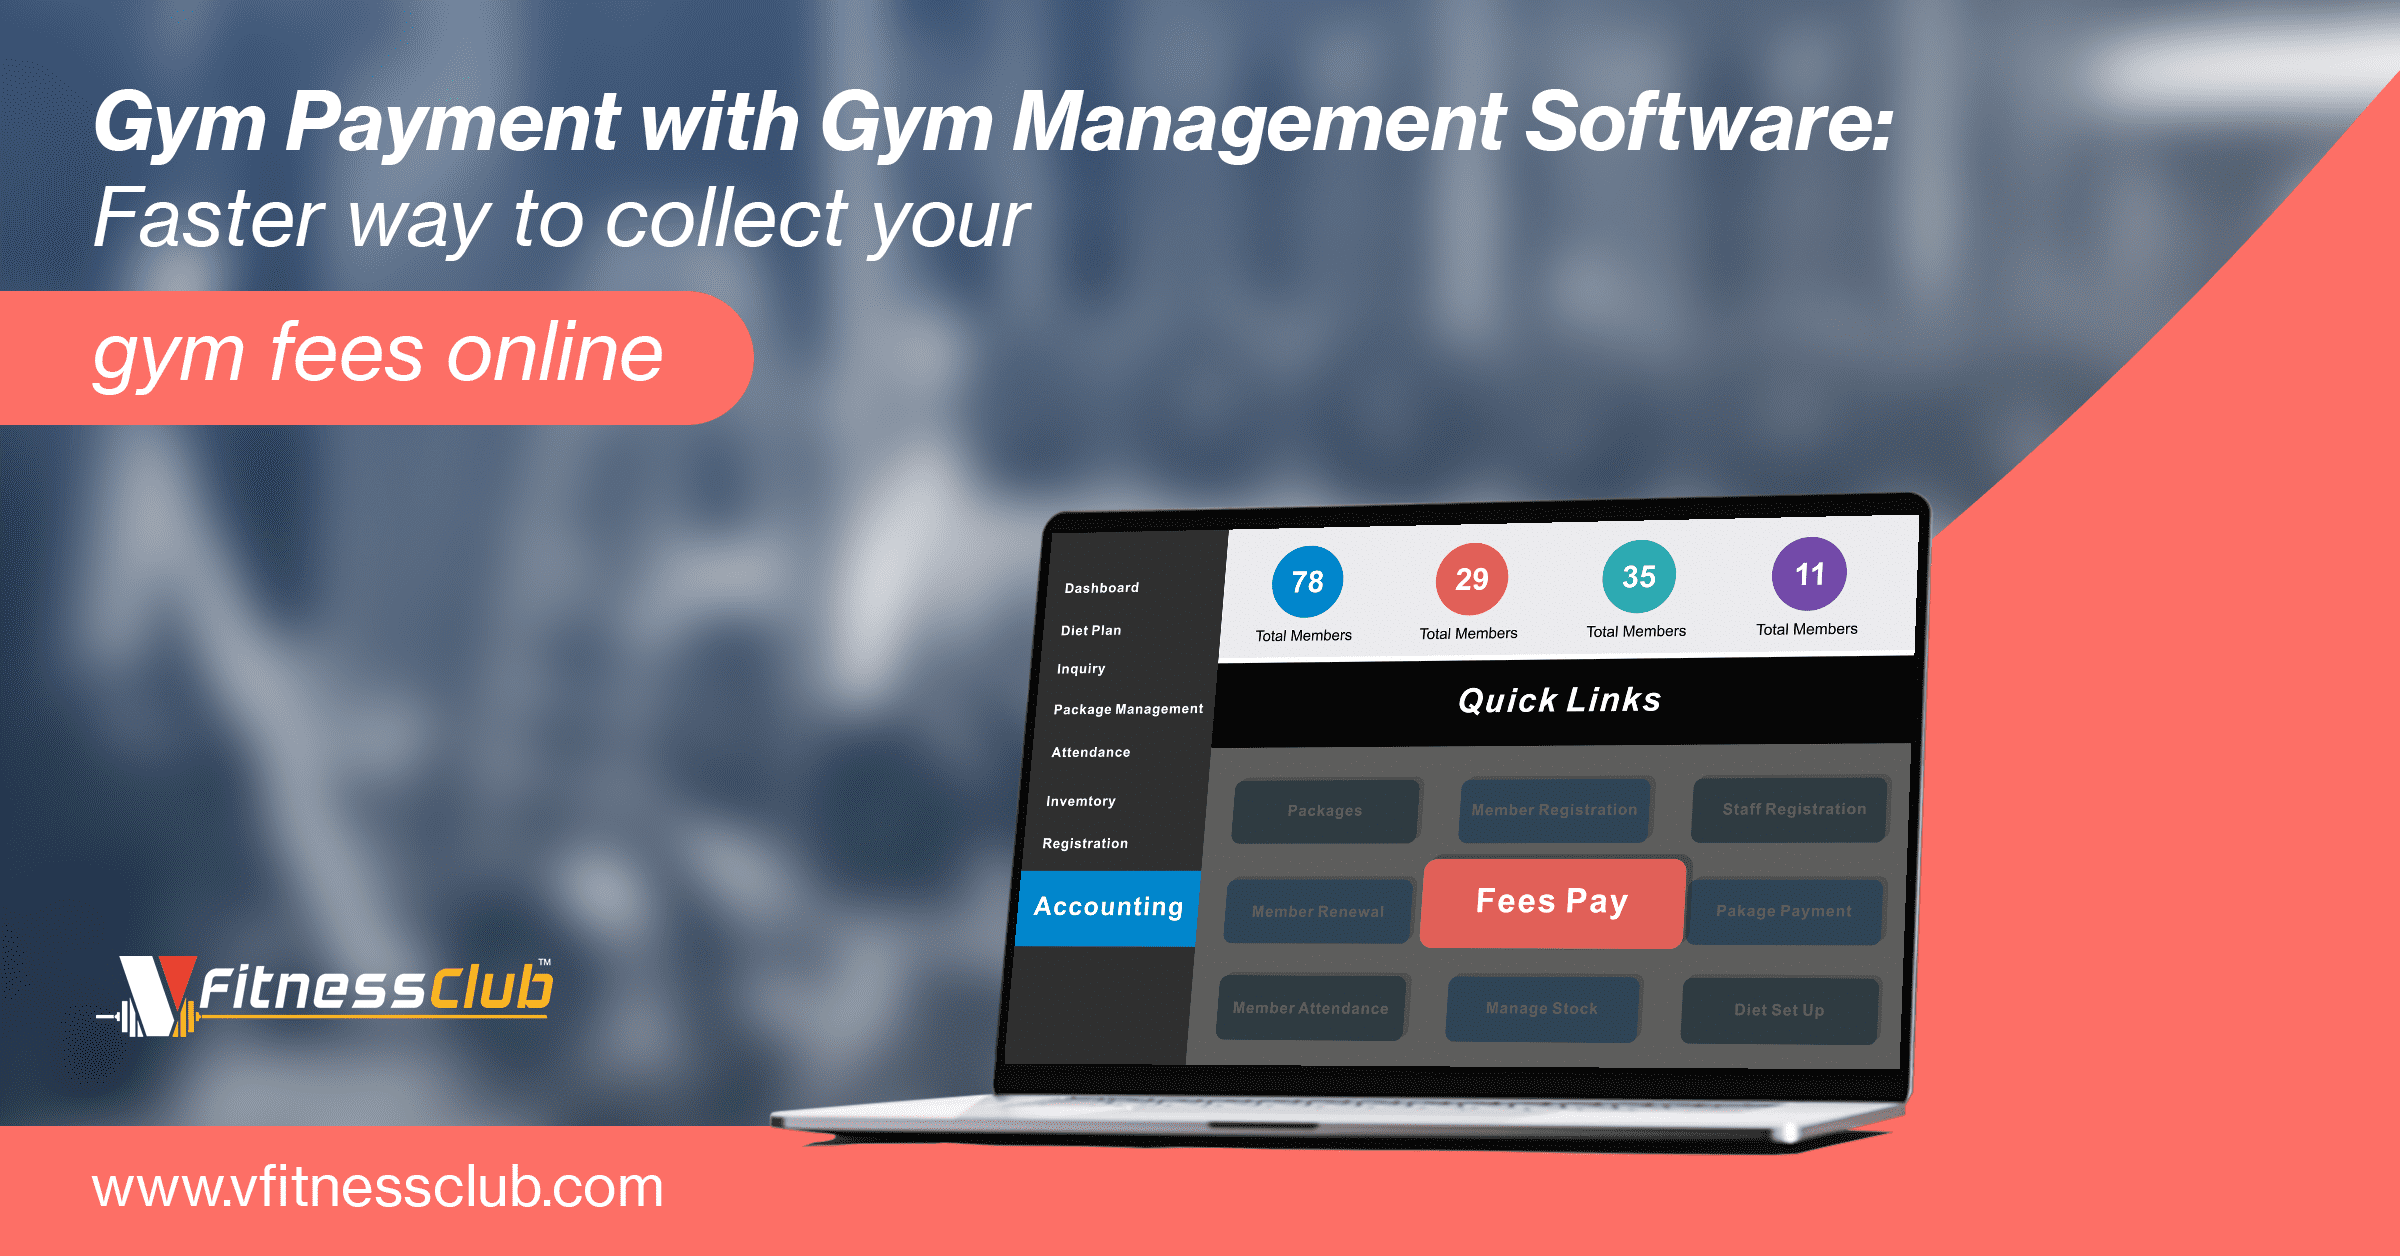 Gym Payment with Gym Management Software: Faster way to collect your gym fees online